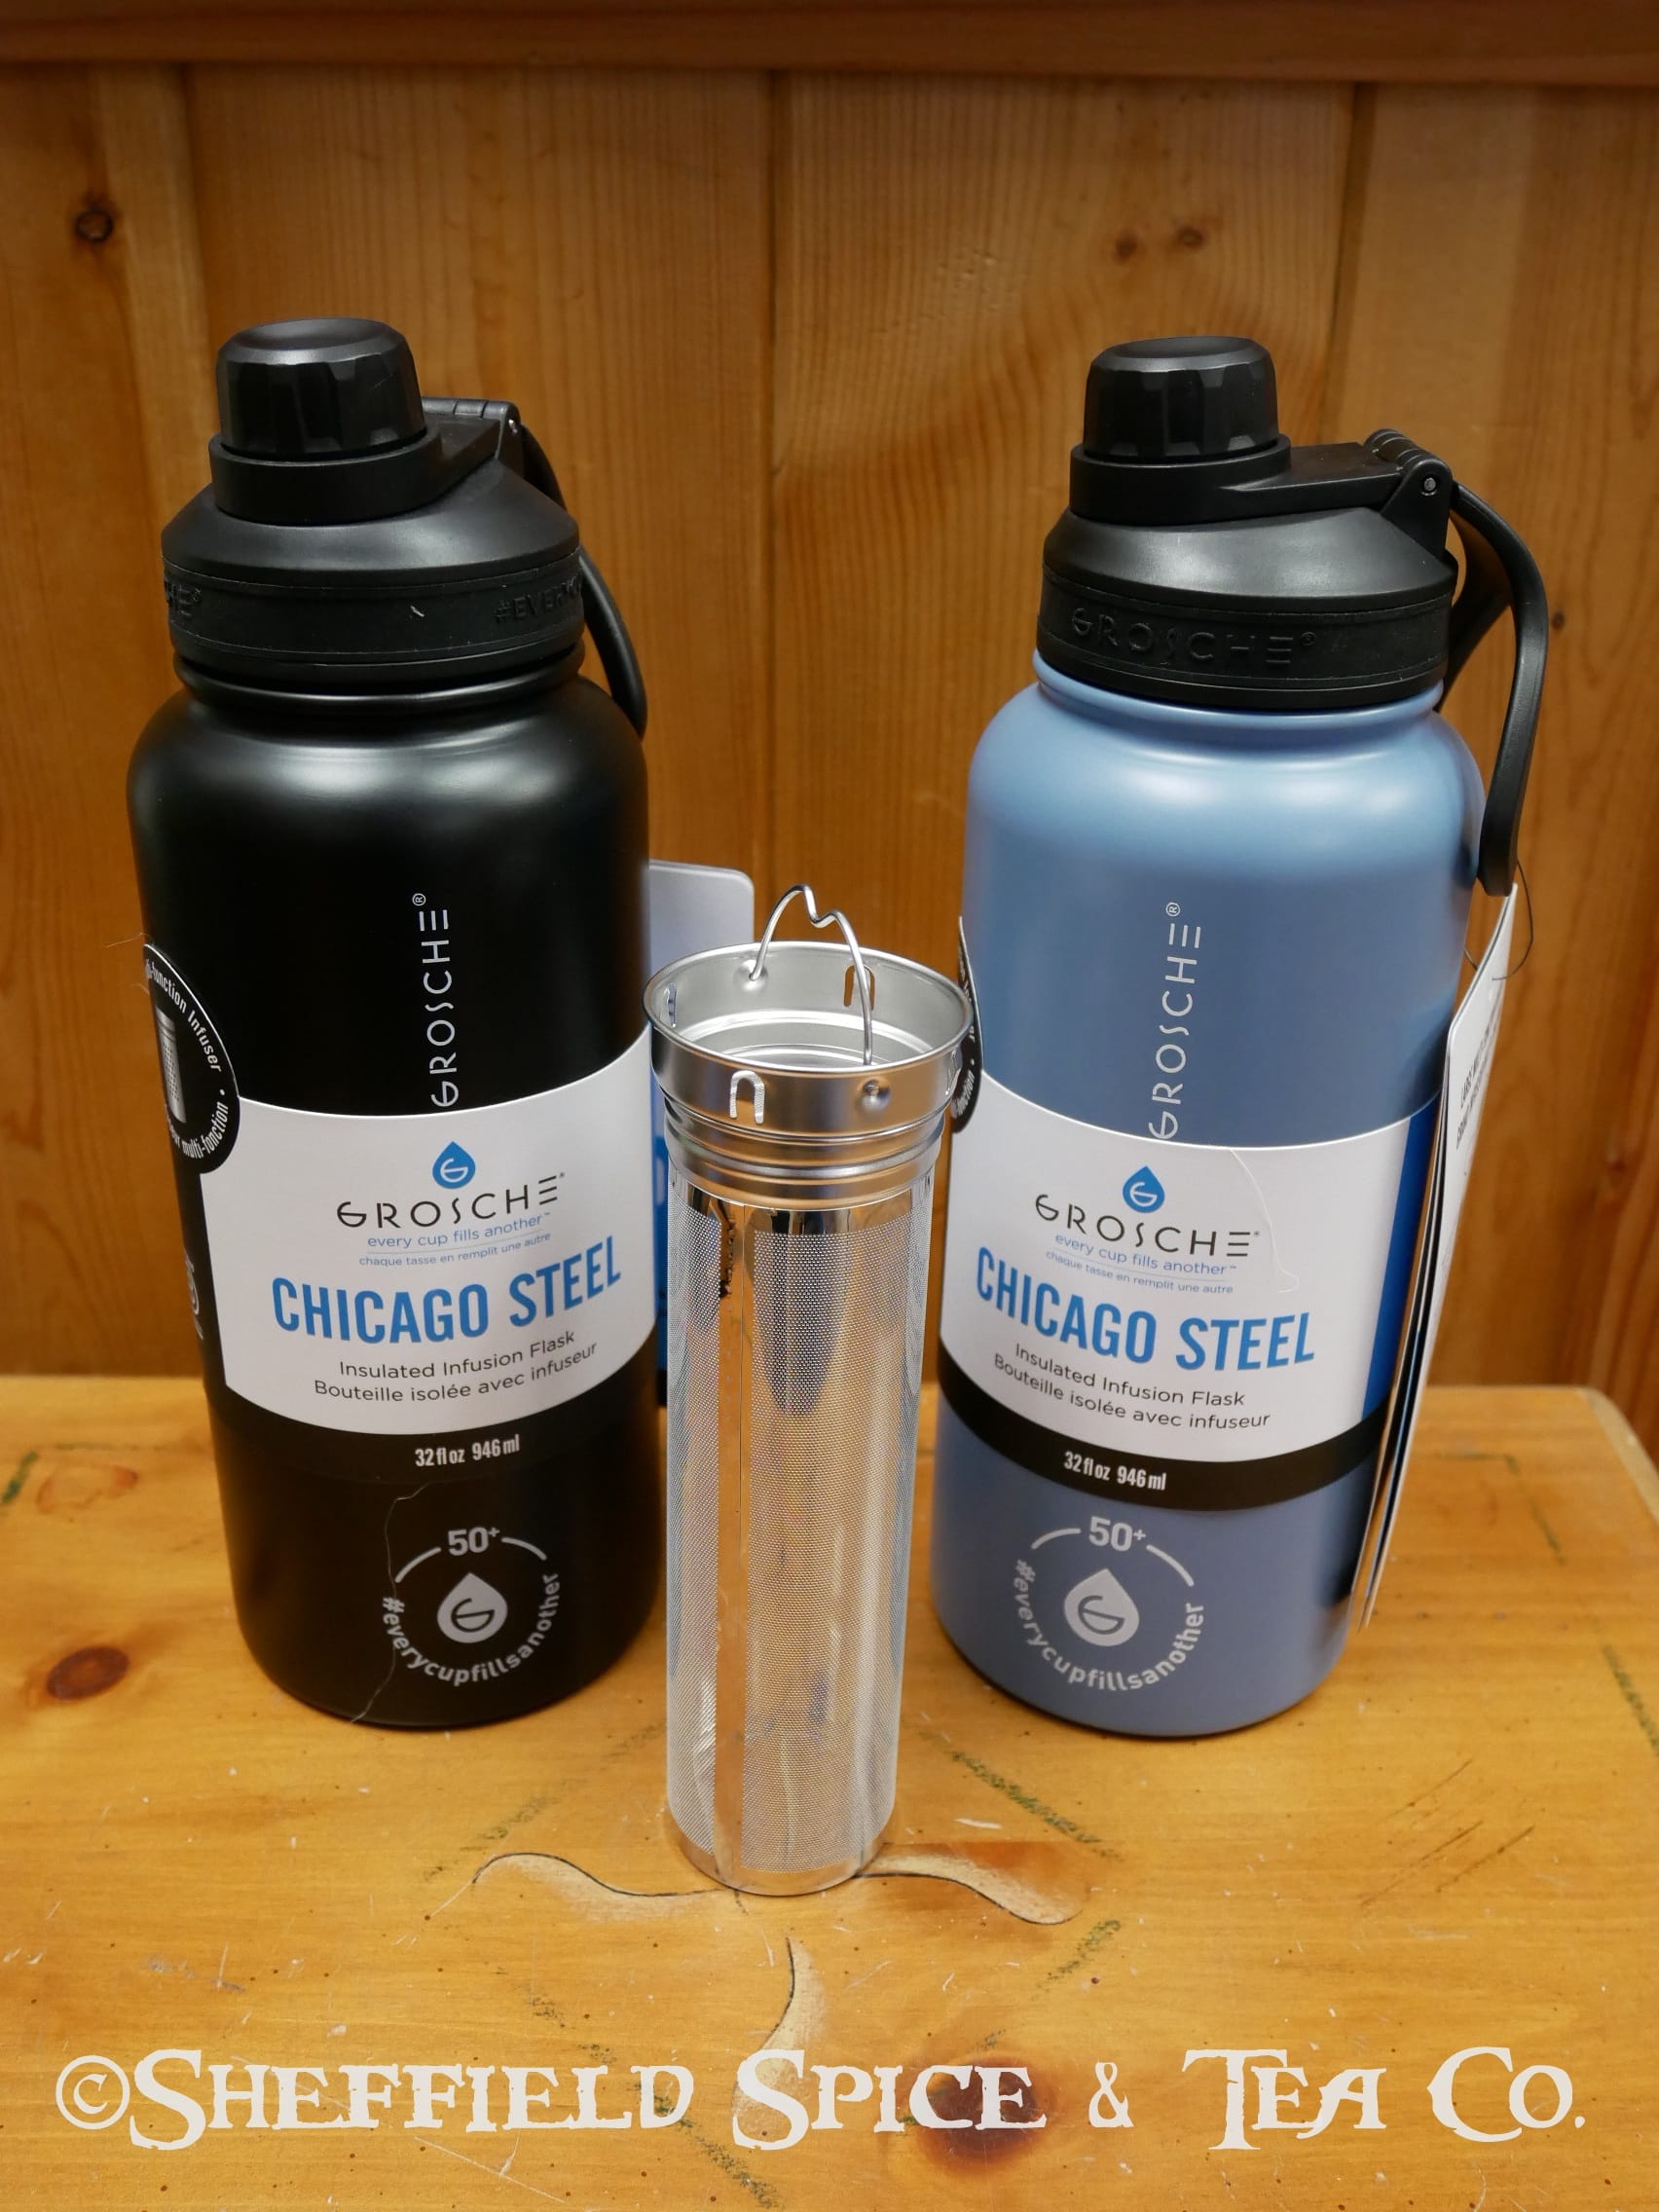 32oz Vacuum Insulated Stainless Steel Water Bottle Black - All in Motion™